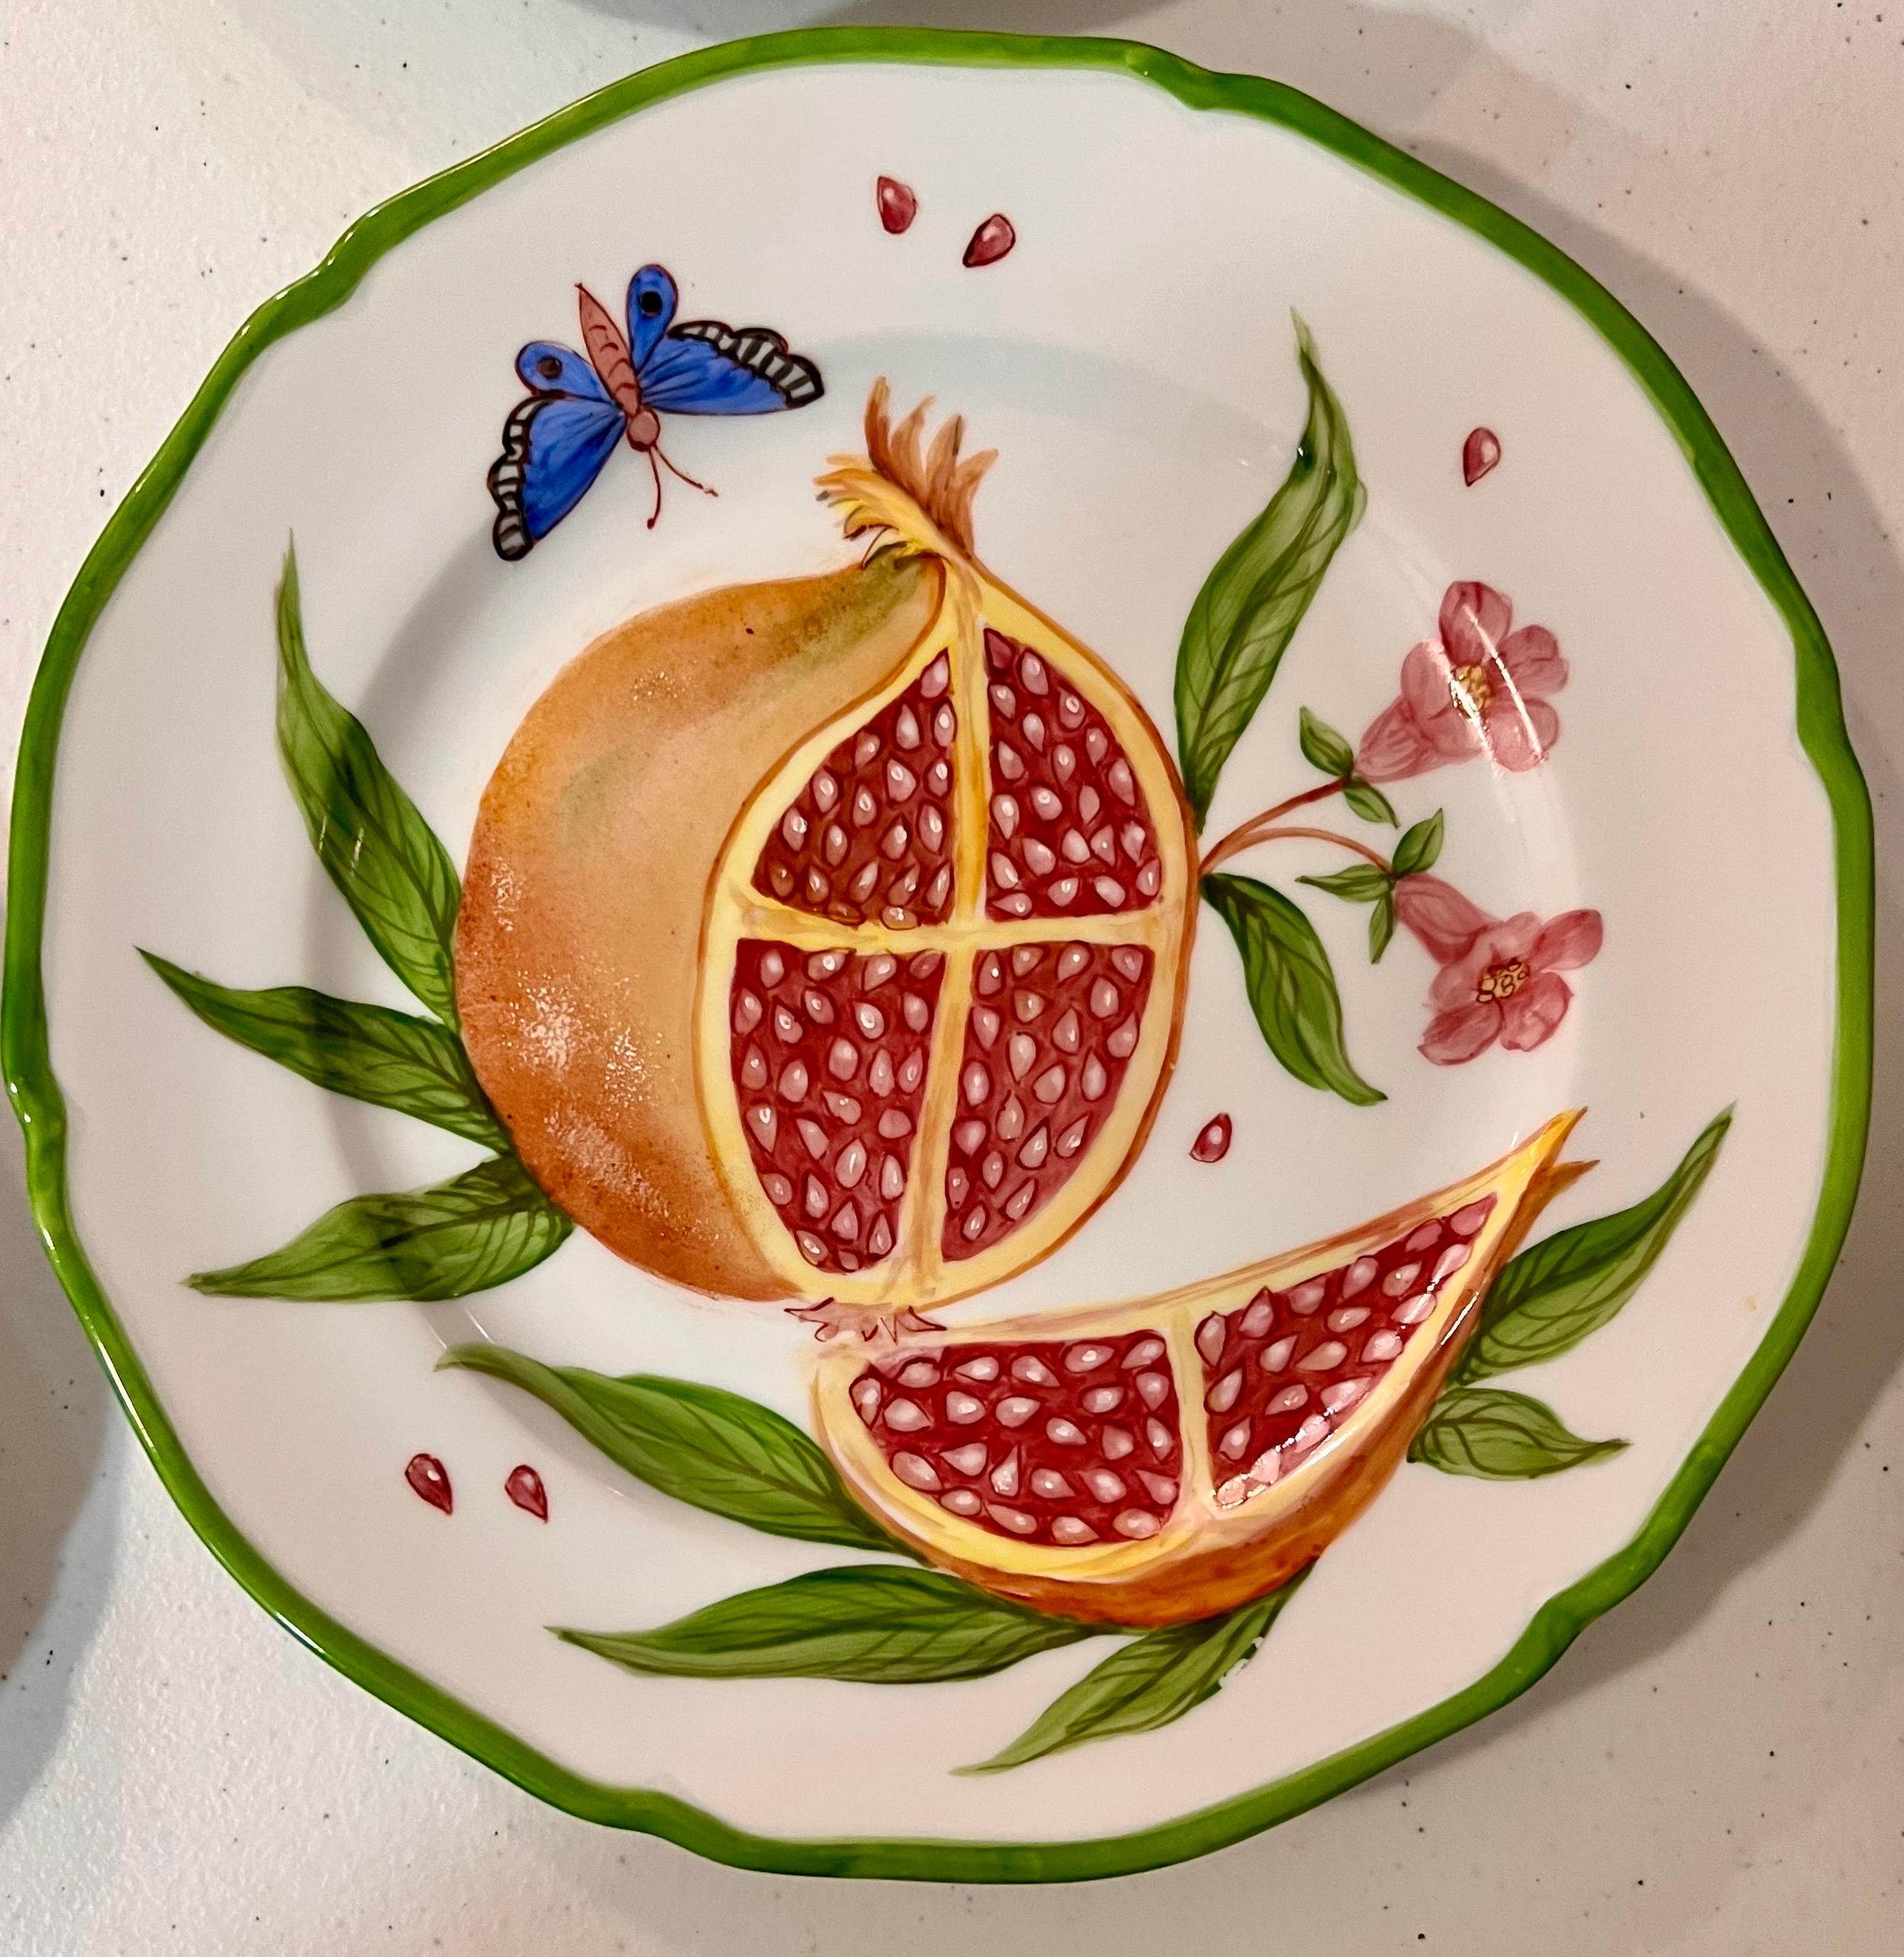 Giovanna Amoruso Manzari hand painted partial table service for Limoges, decorated with fruit, flowers, and butterflies.
Measure 8.66 inches / 22 cm 
* Request info for flatware price for individual plate but if set pirce arranges. 

PRADERA is a